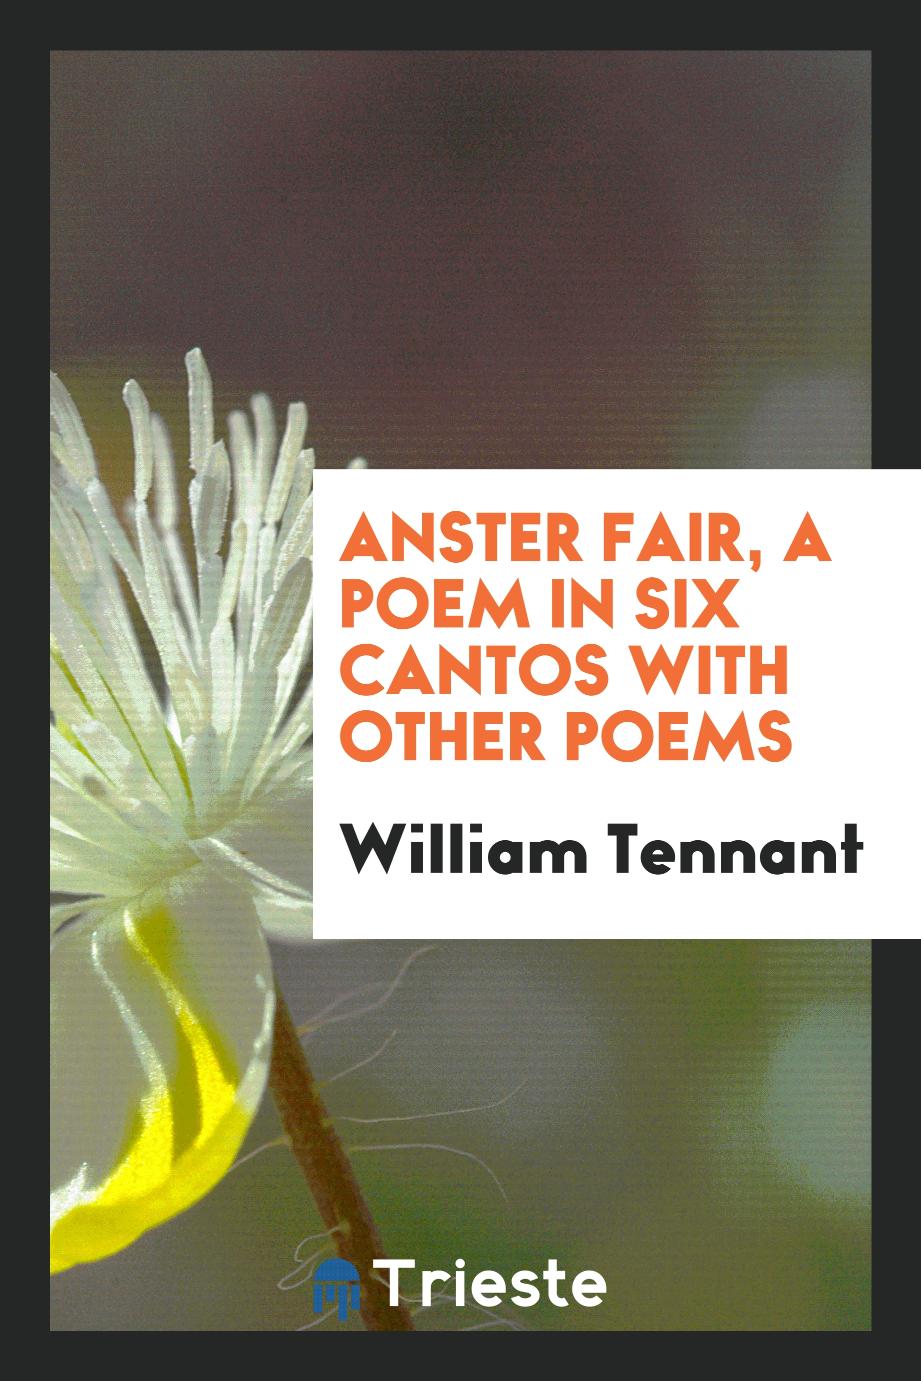 Anster Fair, a poem in six cantos with other poems